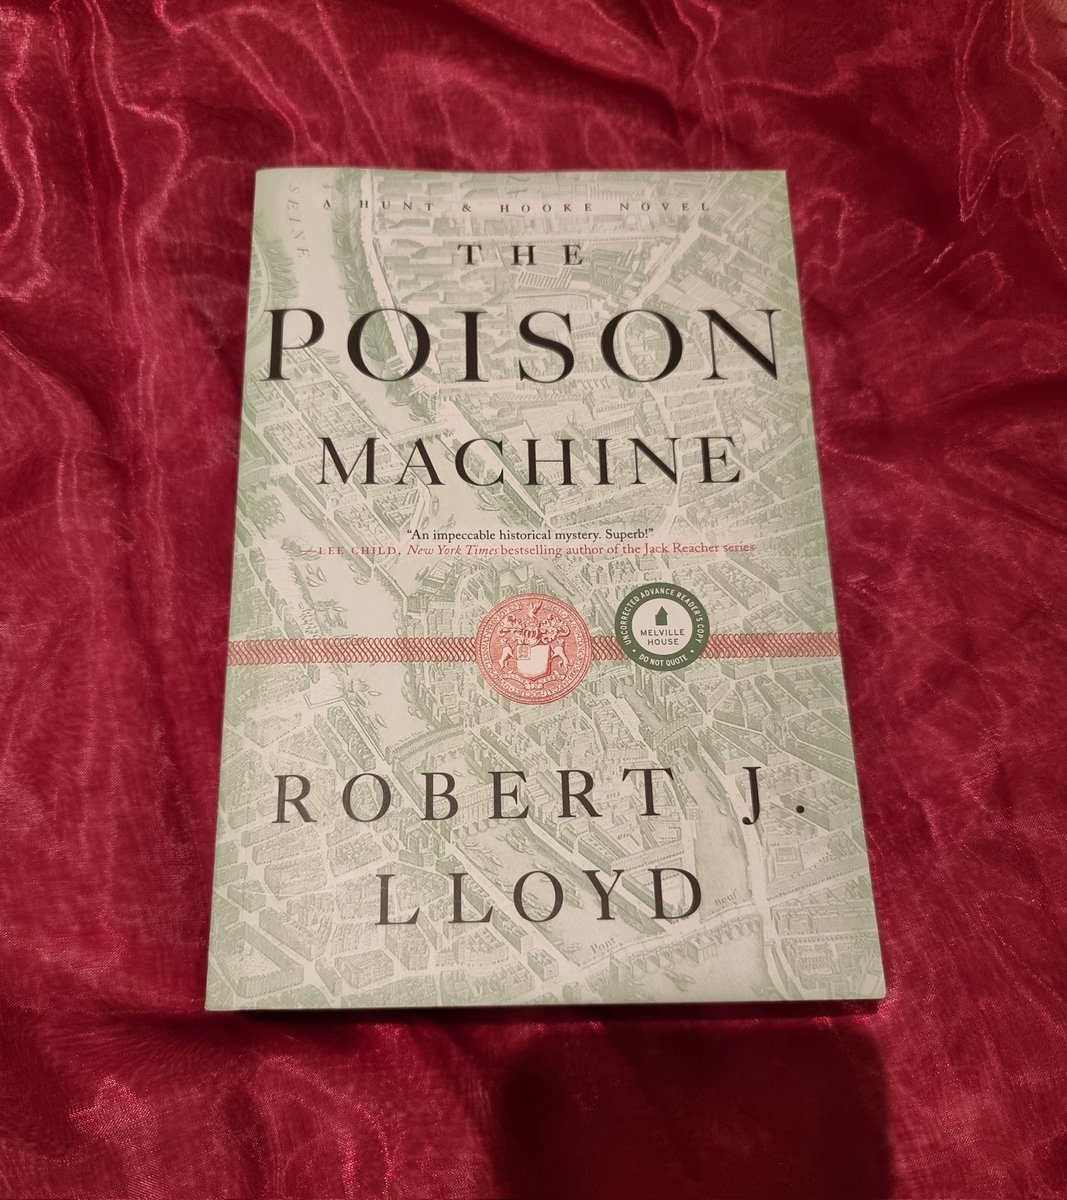 Today is my stop on the #blogtour for #ThePoisonMachine by @robjlloyd I loved this atmospheric historical mystery. Read my review:
instagram.com/p/CkiL_8oLRUM/… Thank you to @NikkiTGriffiths for inviting me on the tour and @melvillehouse for the gorgeous copy to review. #BookTwitter